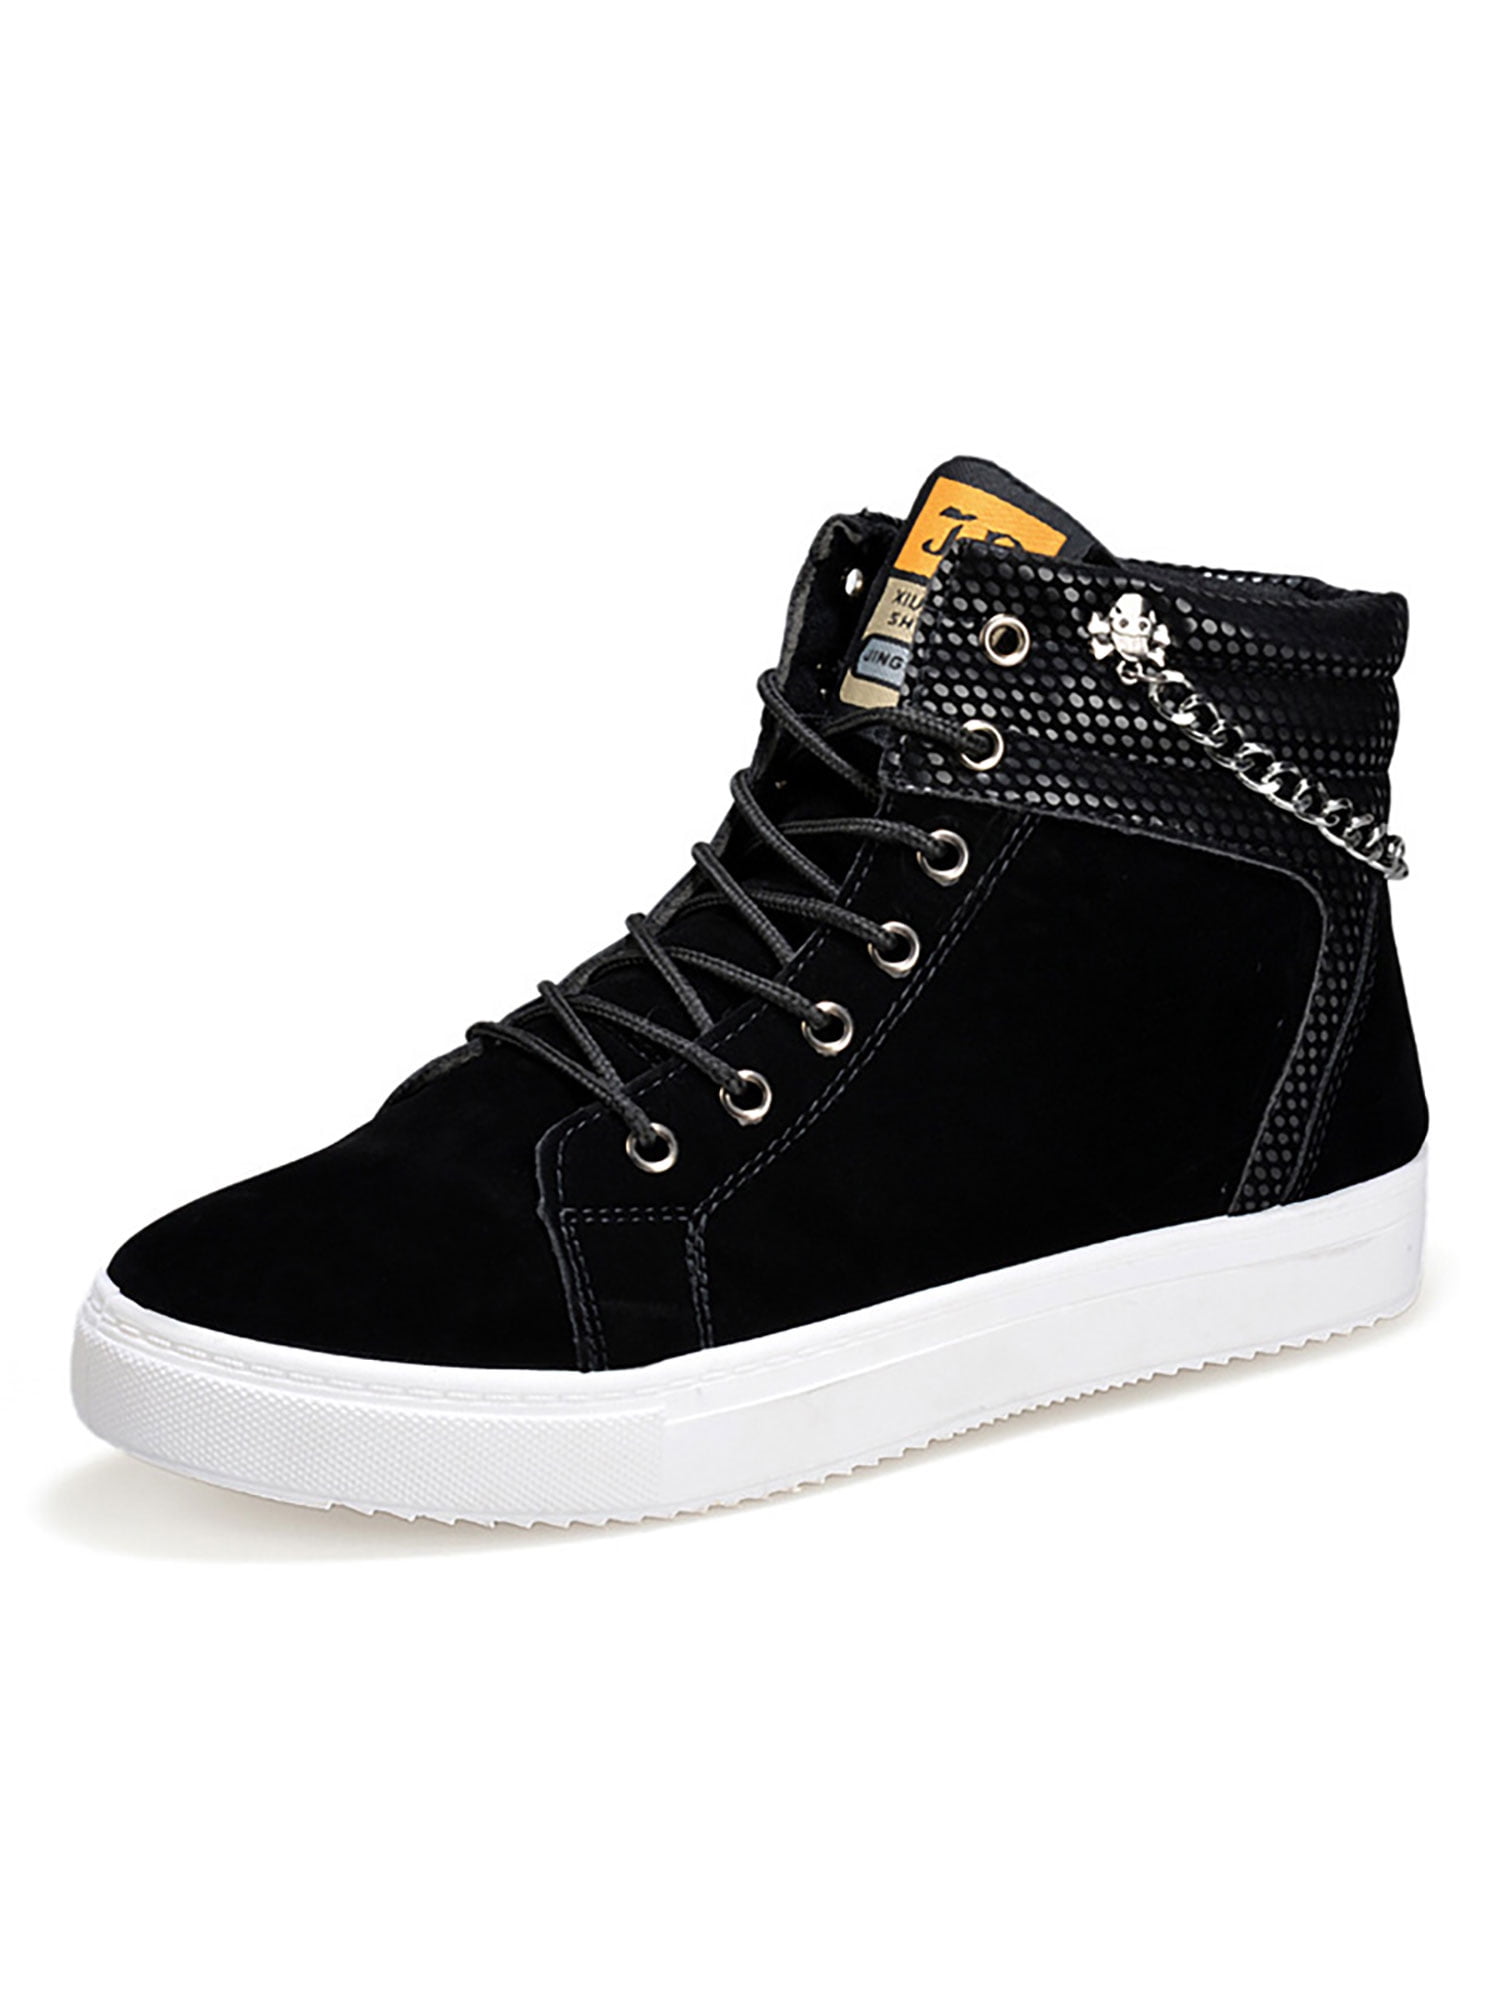 Men's Solid Color High Top Lace-up Flat Sneakers, Casual Outdoor